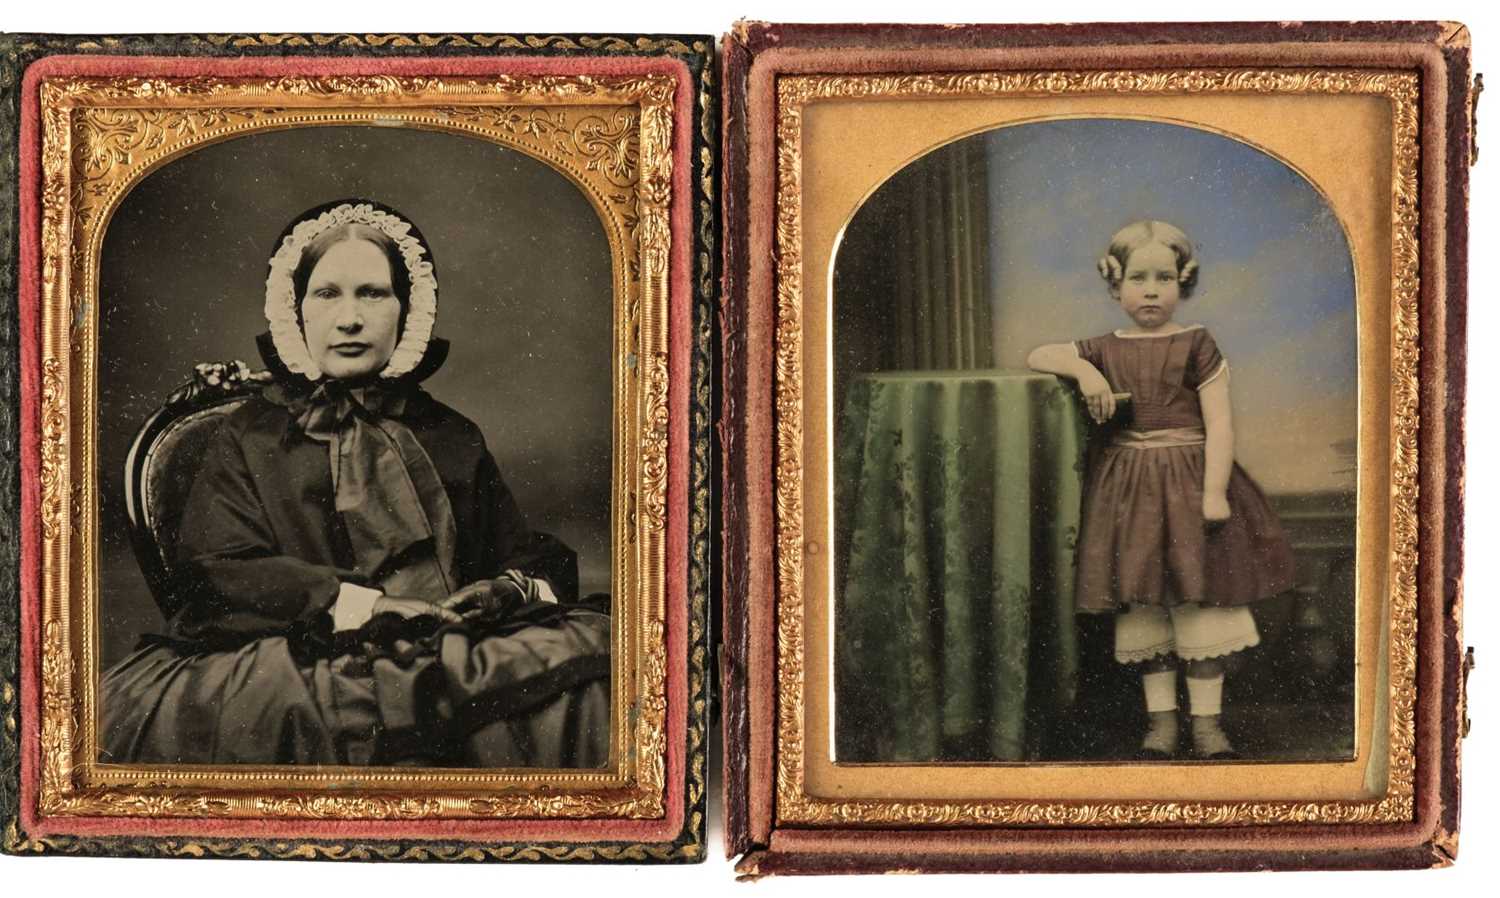 Lot 1 - Ambrotypes. A group of 22 ambrotypes of women and some children, circa 1860s